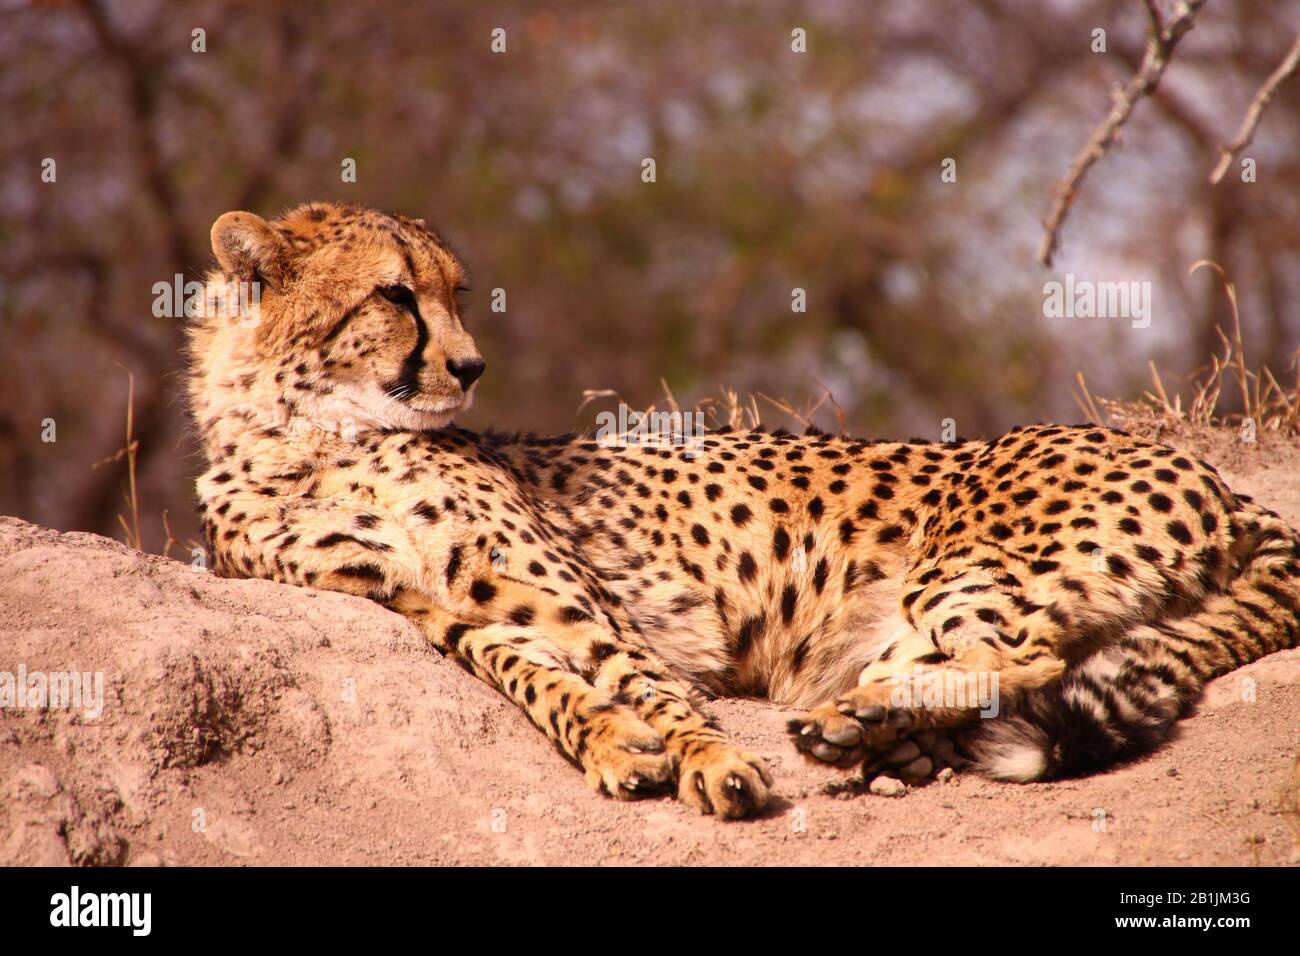 South Africa. A Cheetah lounging in the mid-day sun. Stock Photo